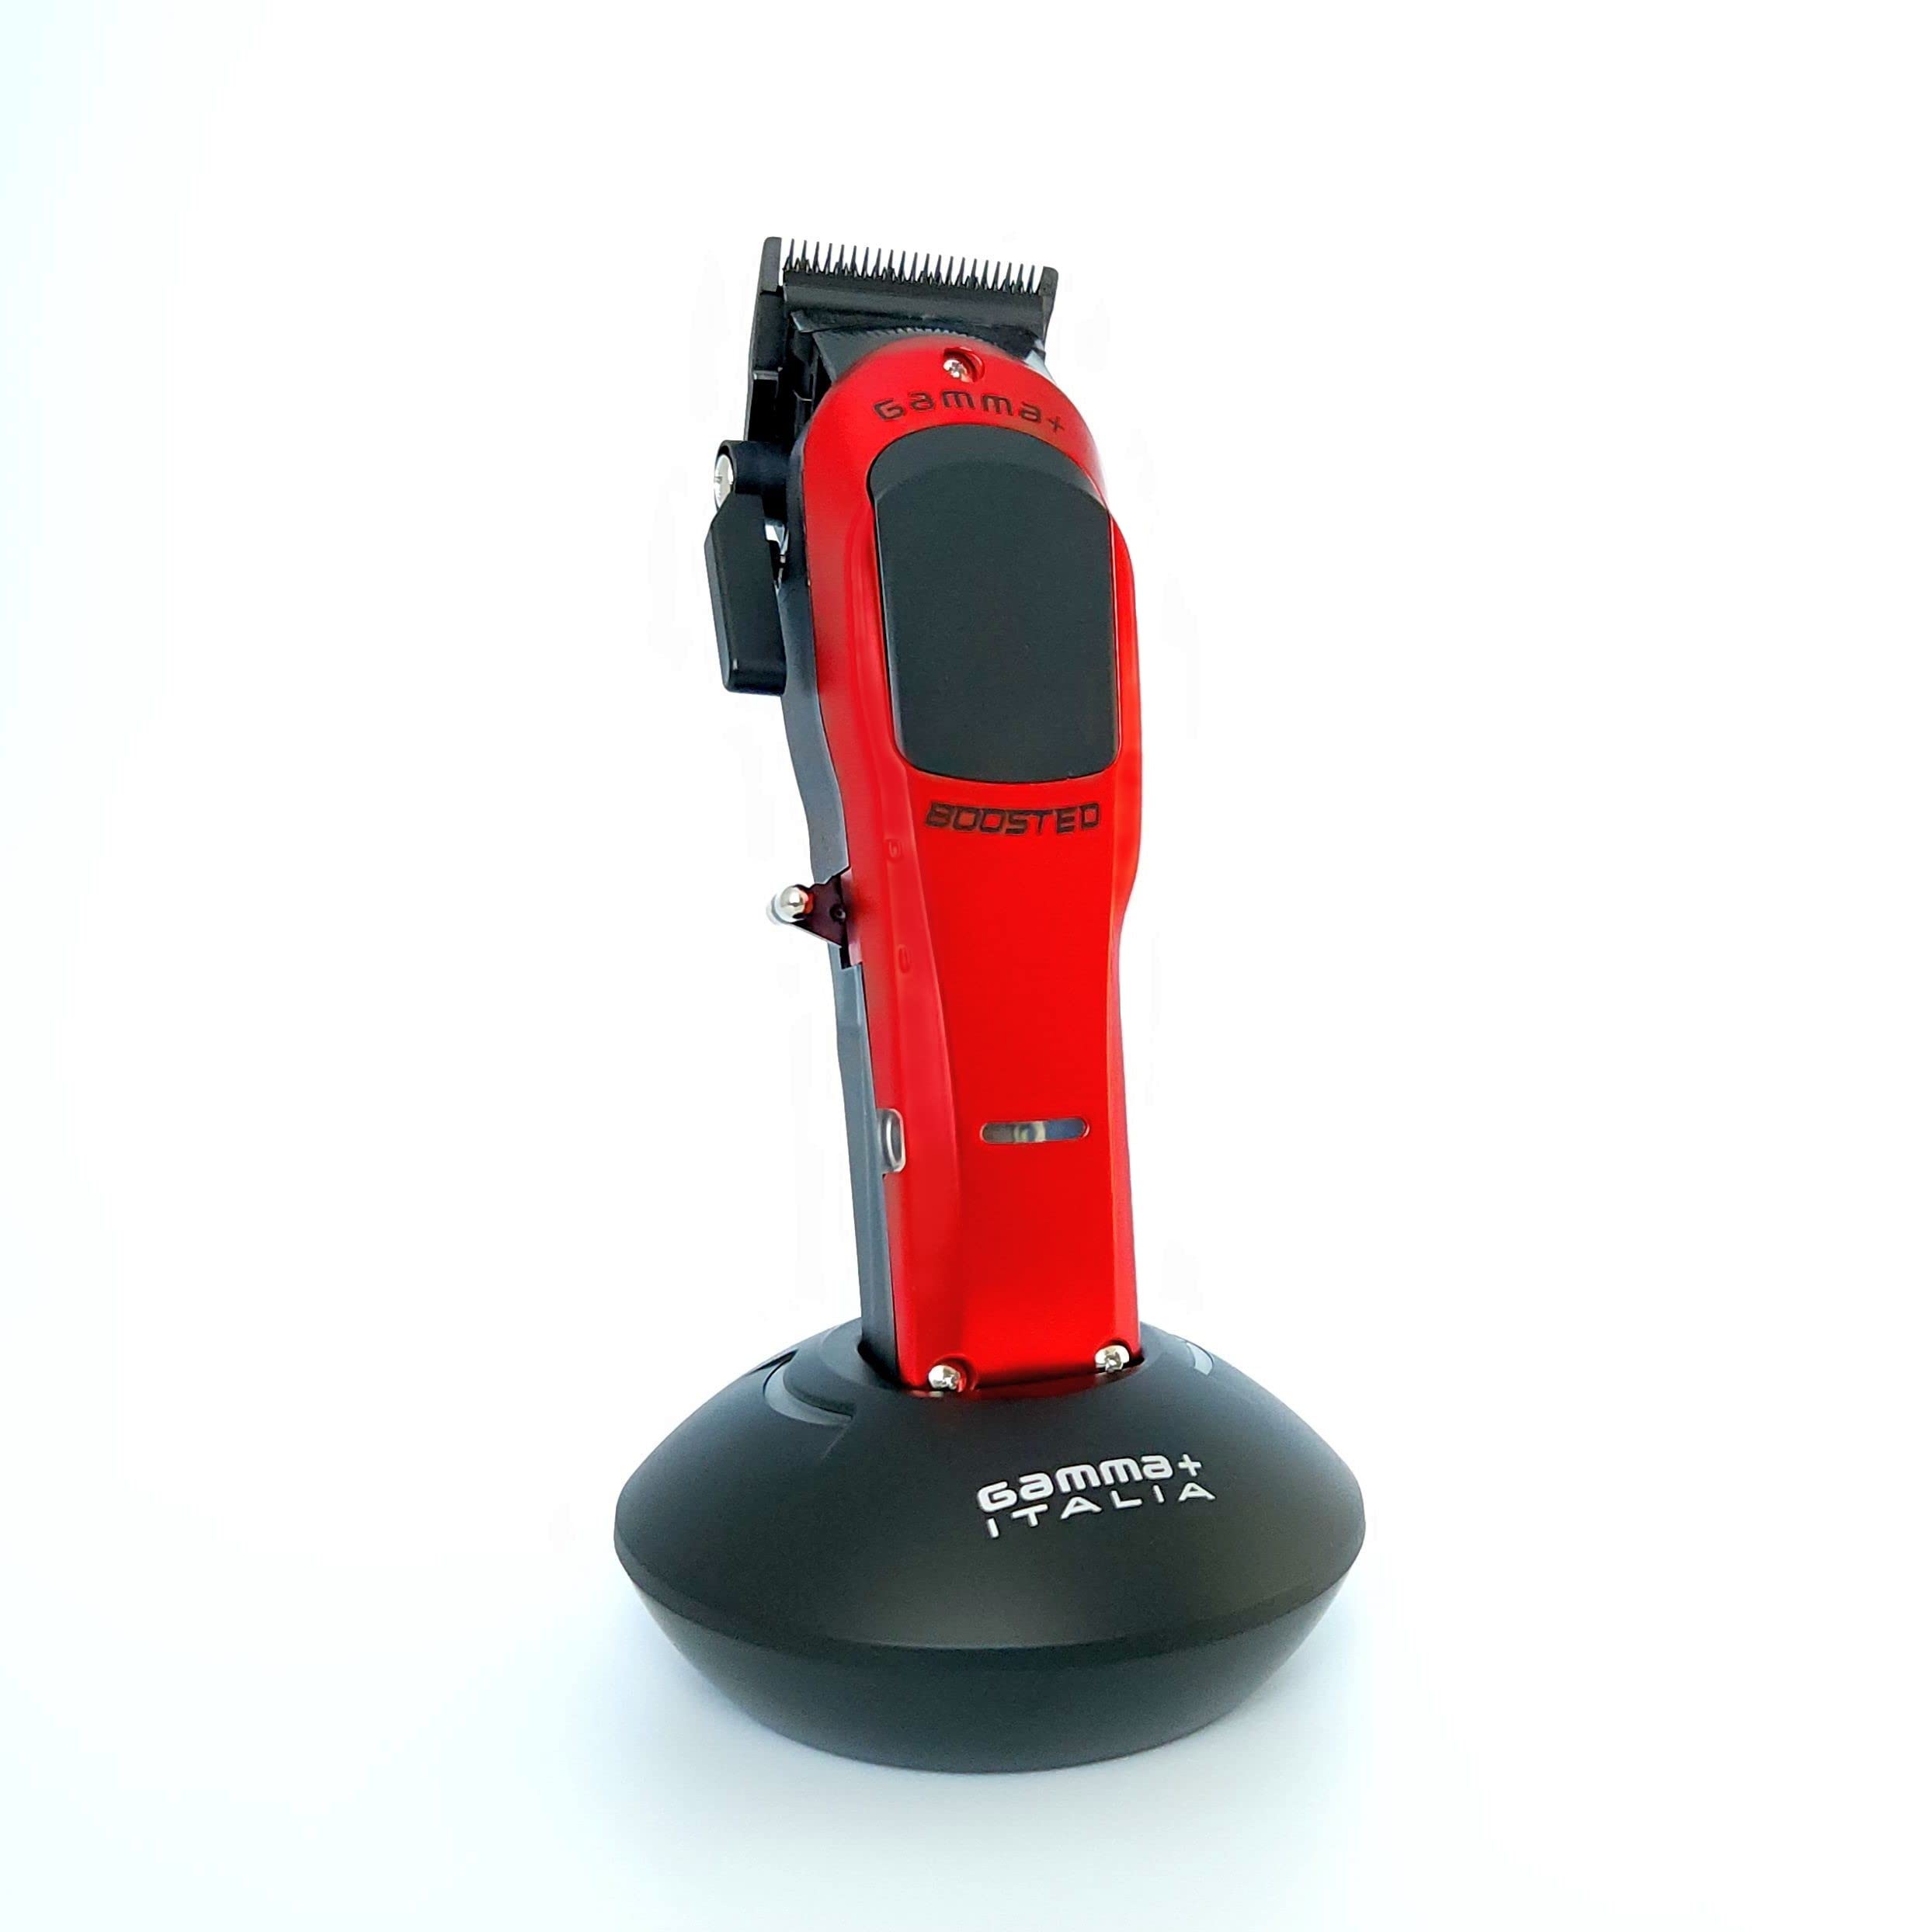 GAMMA+ Boosted Professional Modular Cordless Clipper with Super Torque Motor, 3 Modular Lids Black, Red, Gold